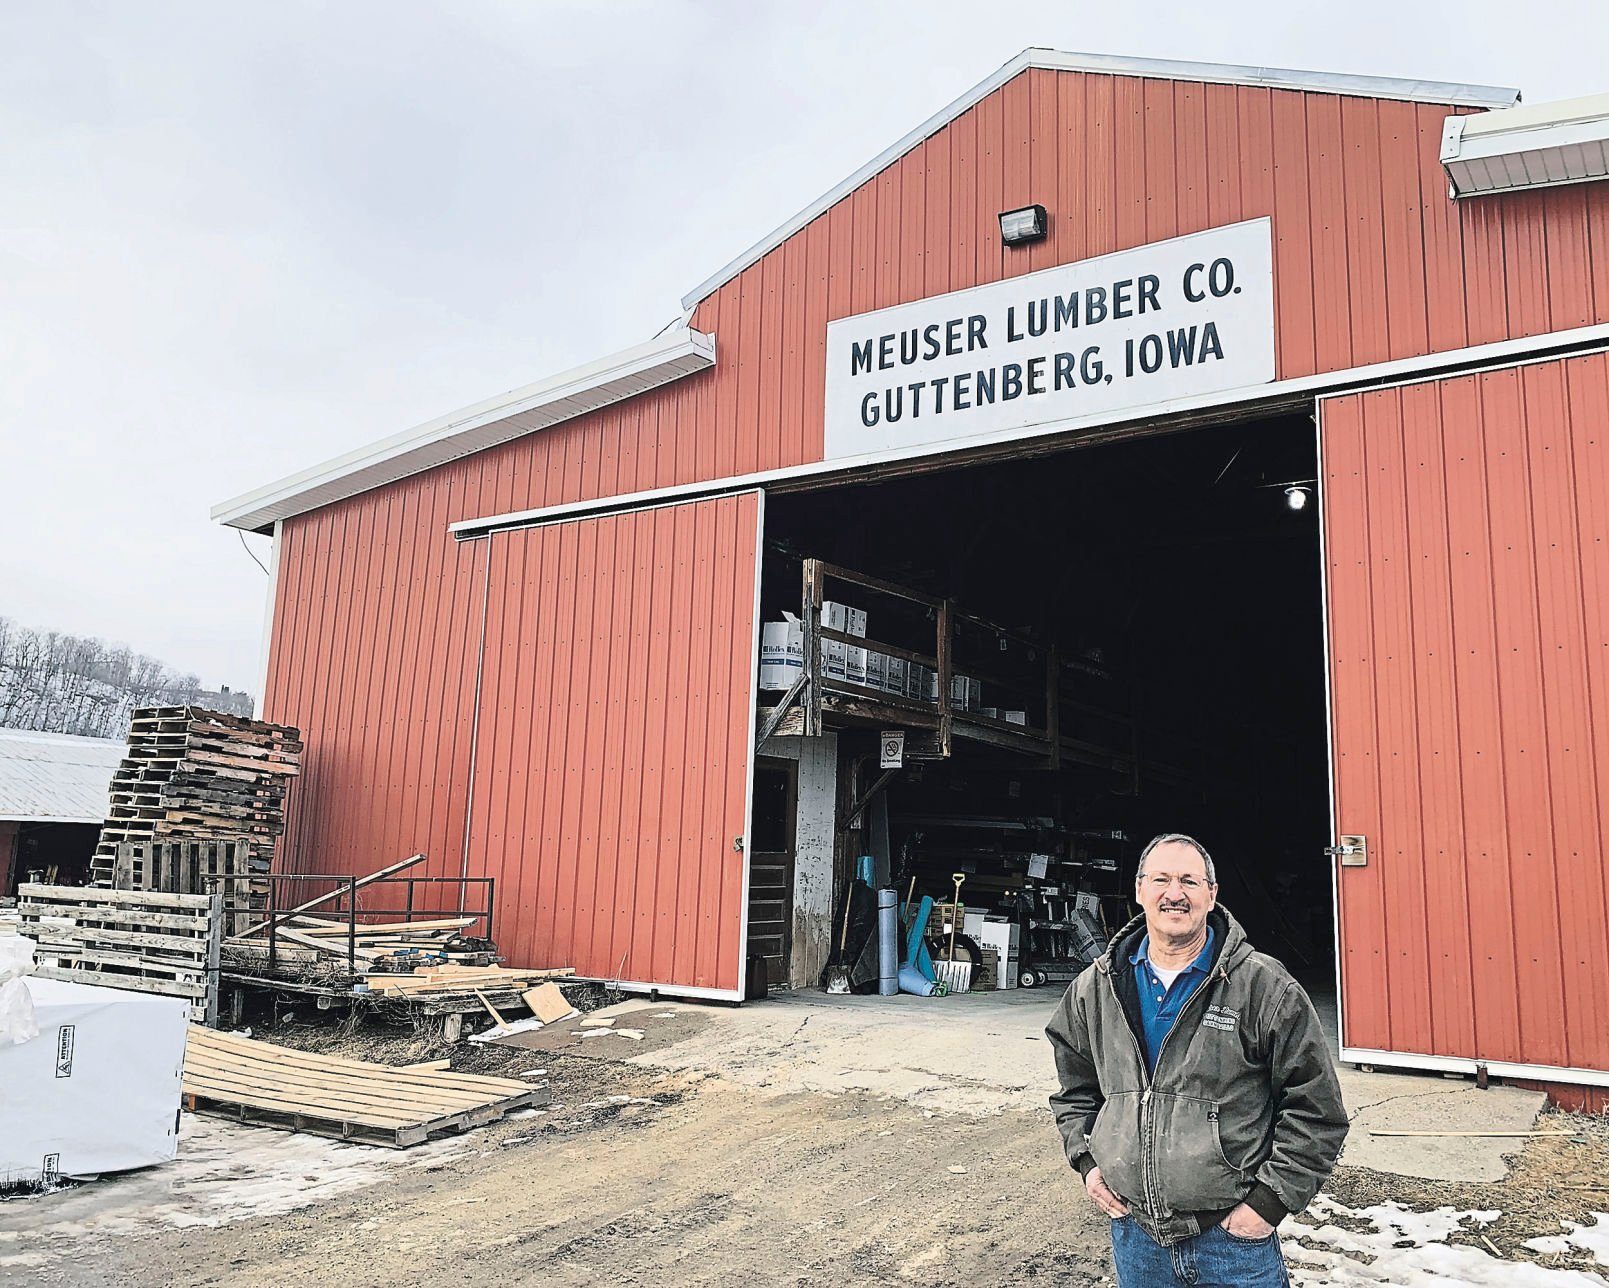 John Finch is the current owner and manager of Meuser Lumber Co. in Guttenberg, Iowa. Finch, who has been fully involved in the business since 1976, is the fourth generation of his family to own the firm. It has been in operation for 114 years.    PHOTO CREDIT: Erik Hogstrom